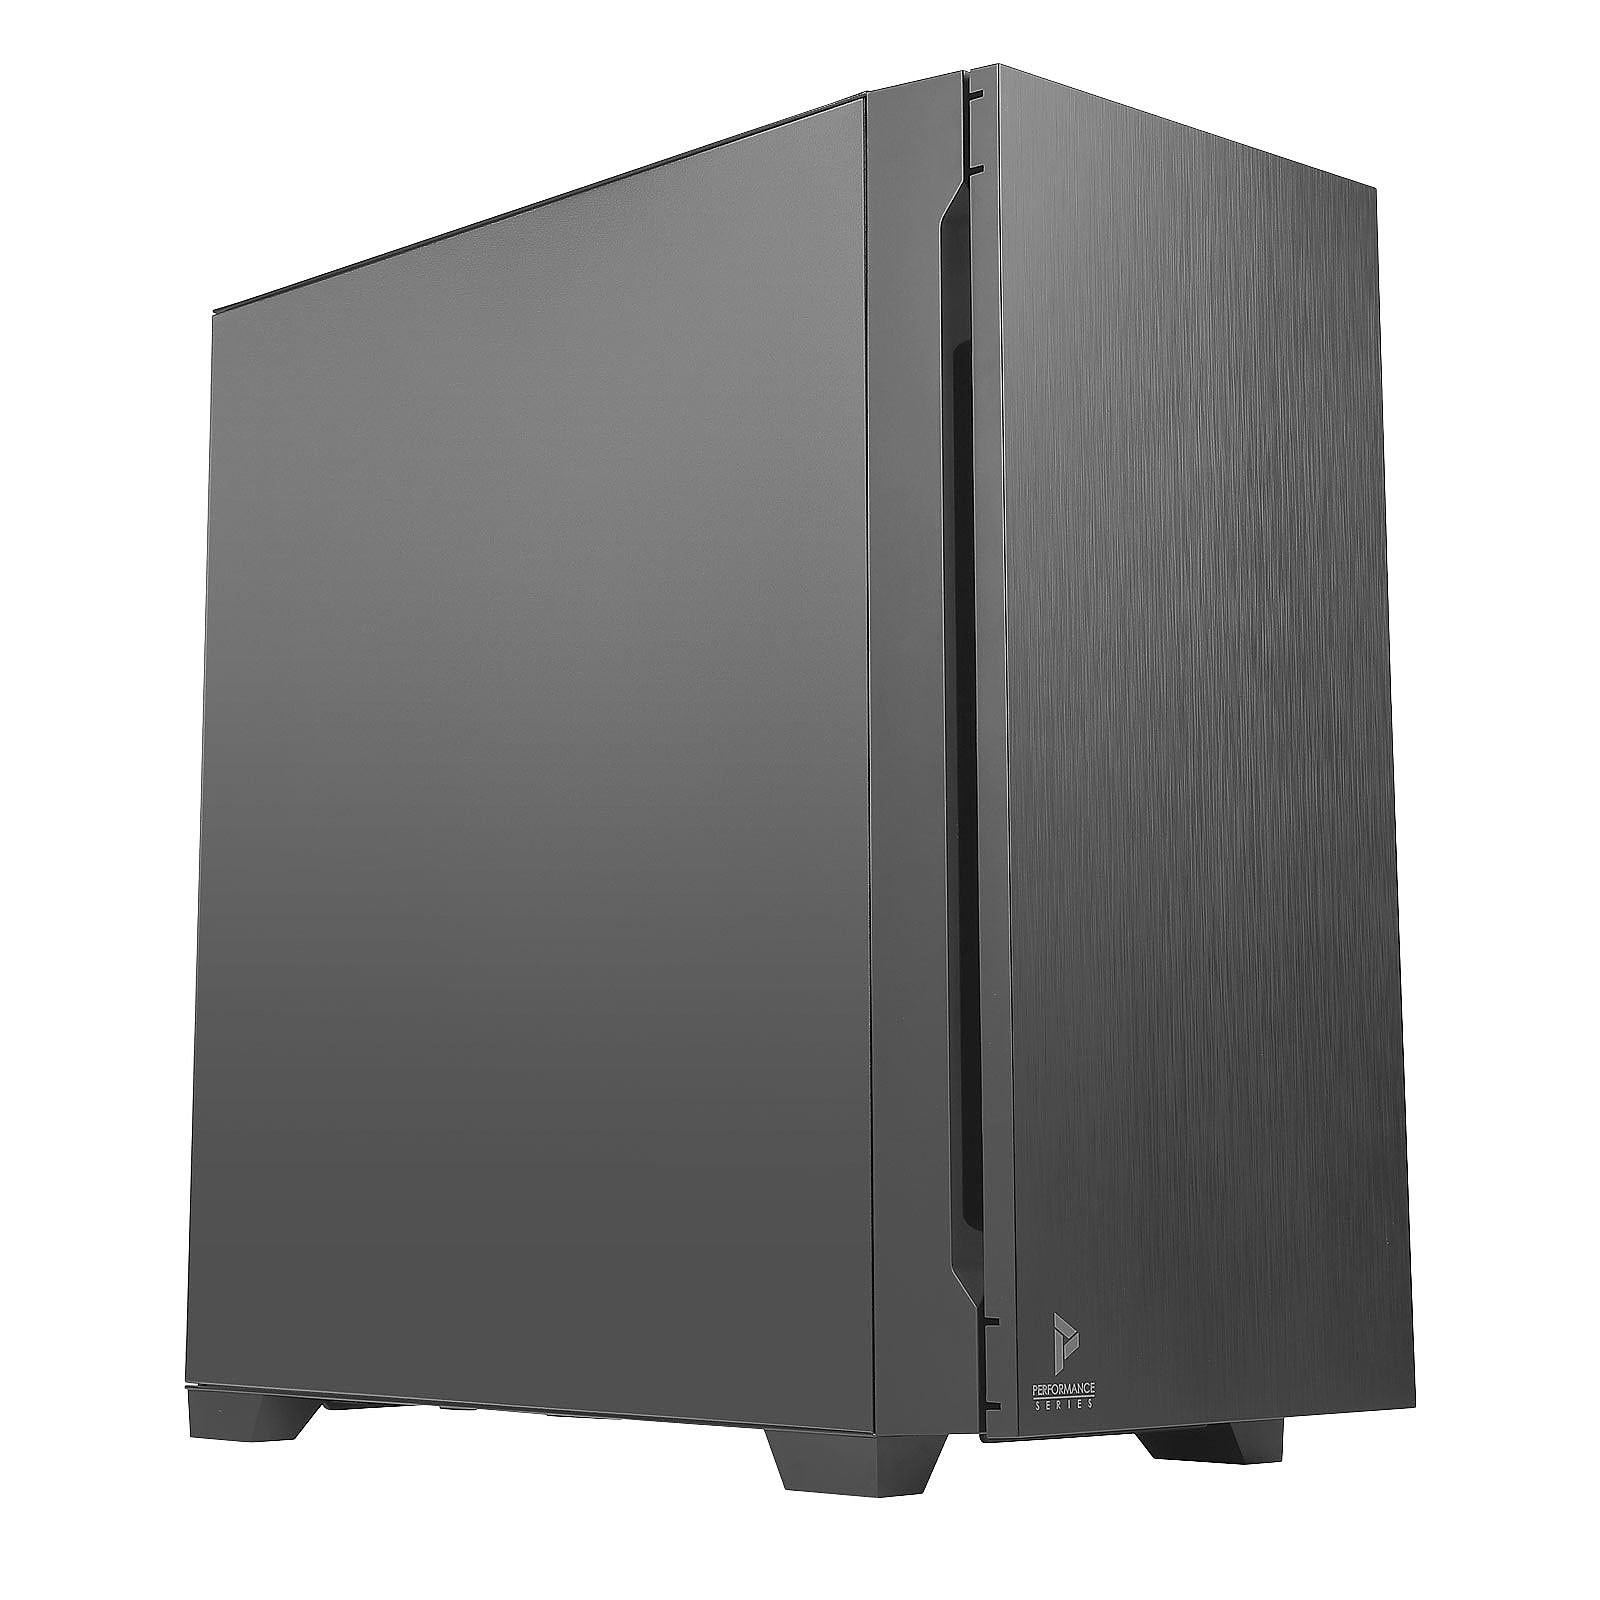 Computer Cases/Antec: Antec, P10C, ATX, Silent, High, Airflow, Ultra, Sound, Dampening, from, 4, sides, 6x, HDDS, 5x, 120mm, Fans, Built, in, Fan, control, 